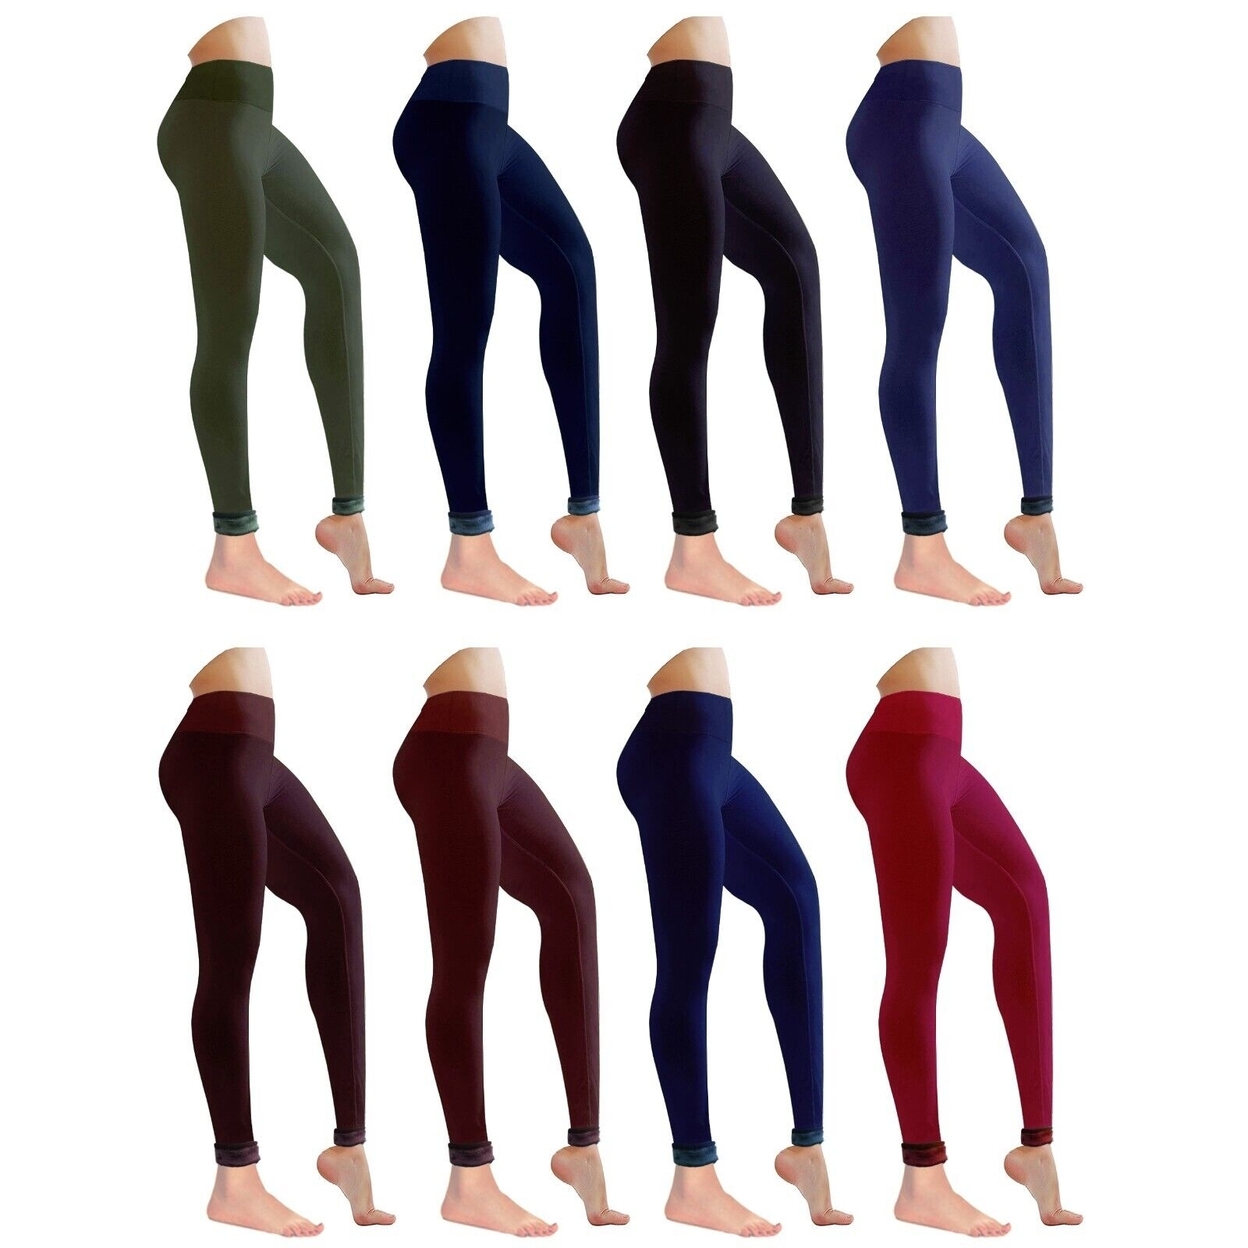 Multi-Pack: Women's Winter Warm Ultra Soft Cozy Fur Lined Leggings - Assorted, 1-pack, Xx-large